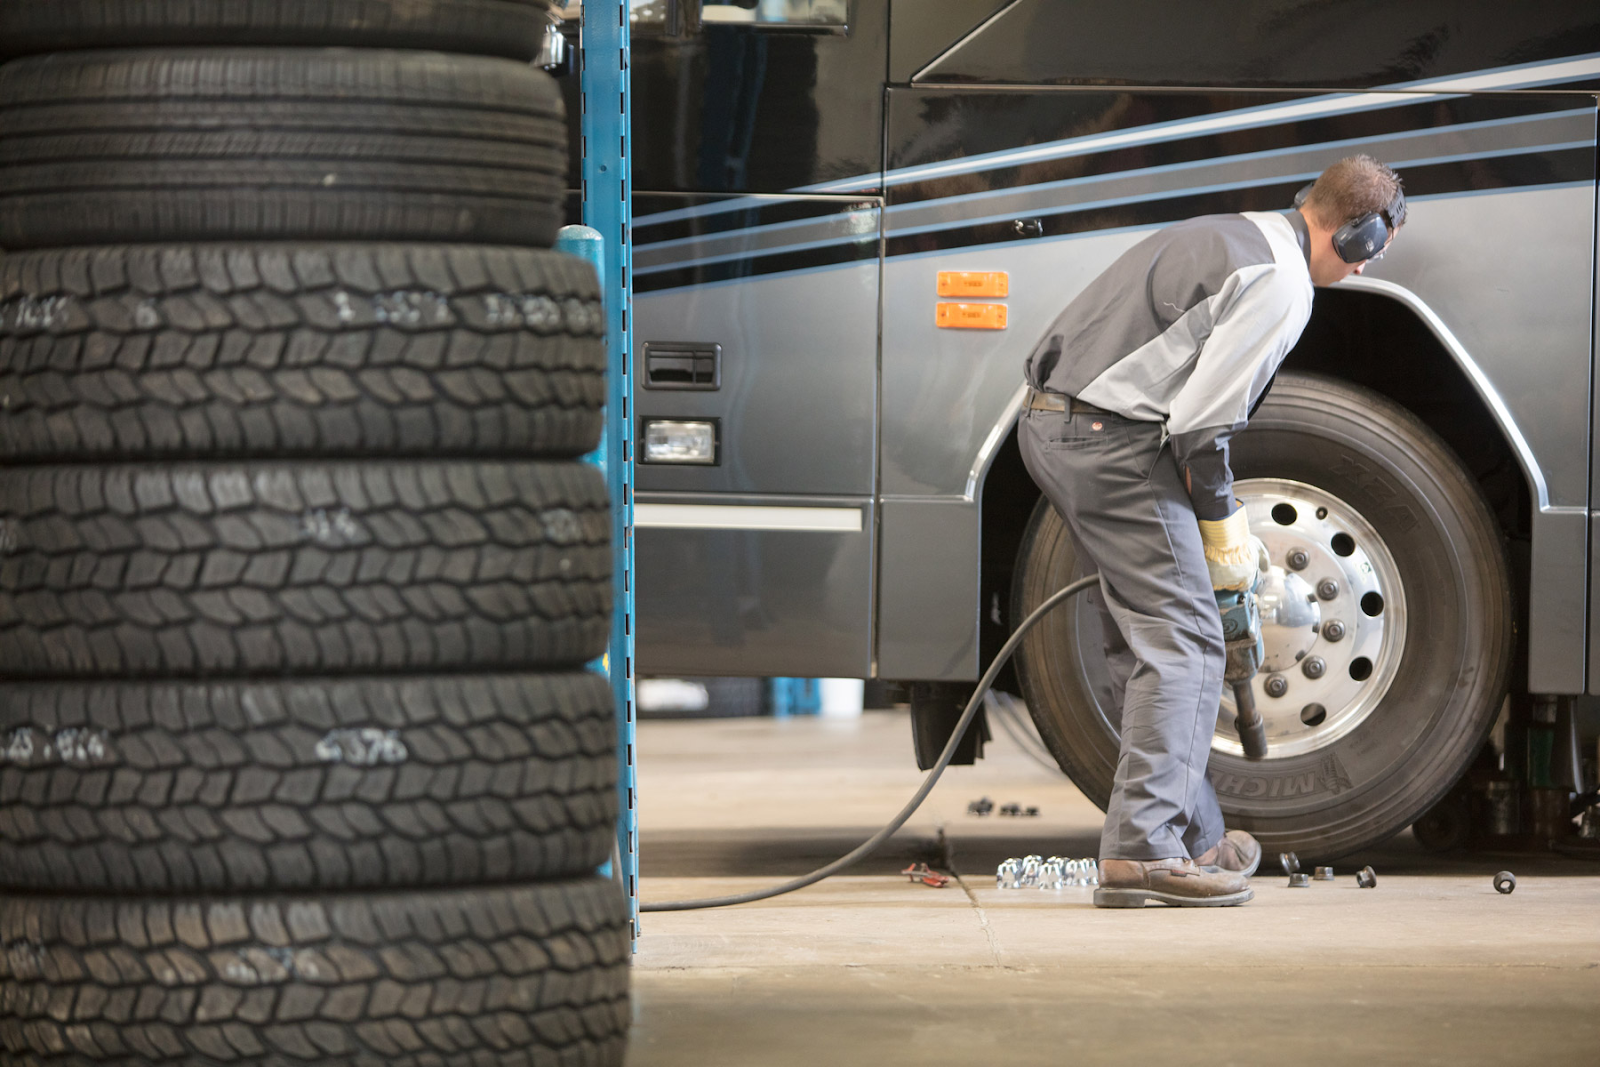 Wonderland Tire technician is replacing an RV tire at the Byron Center location.